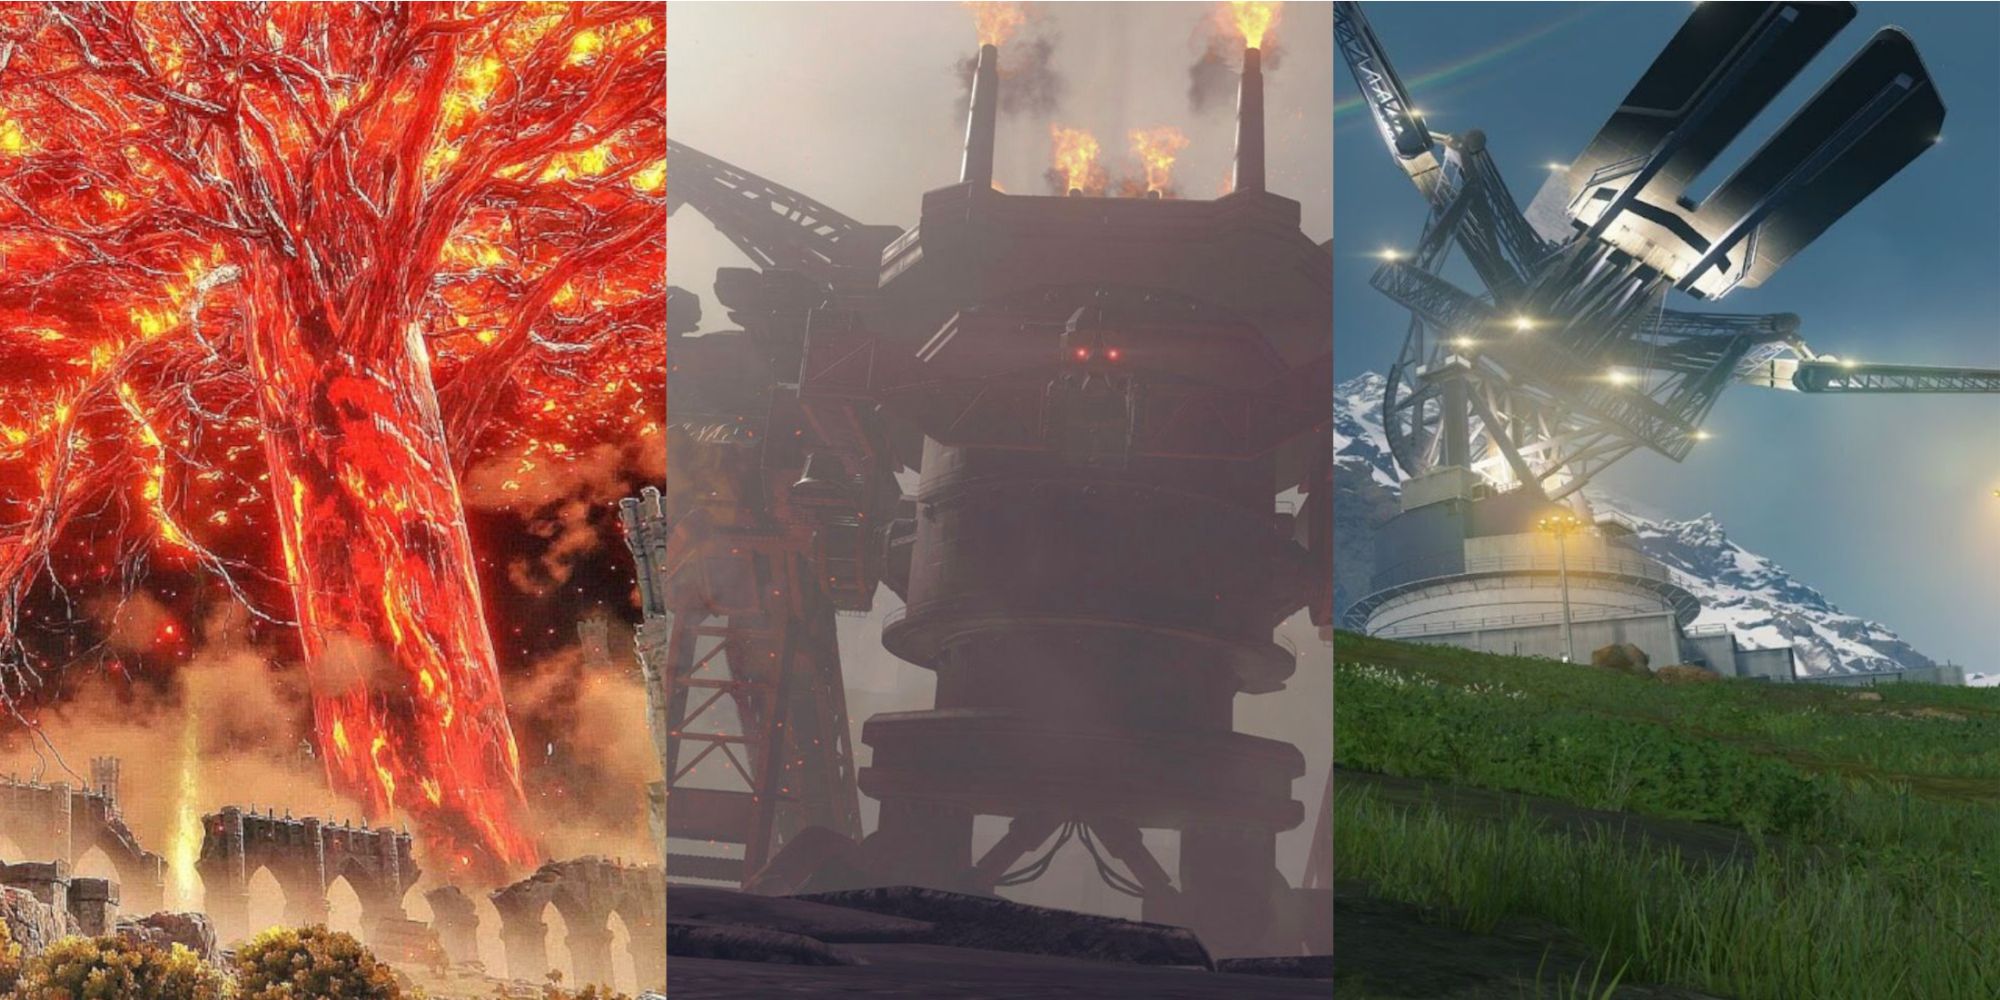 The Erdtree burning in Elden Ring, Engels from Nier Automata, and a weather station from Death Stranding, left to right